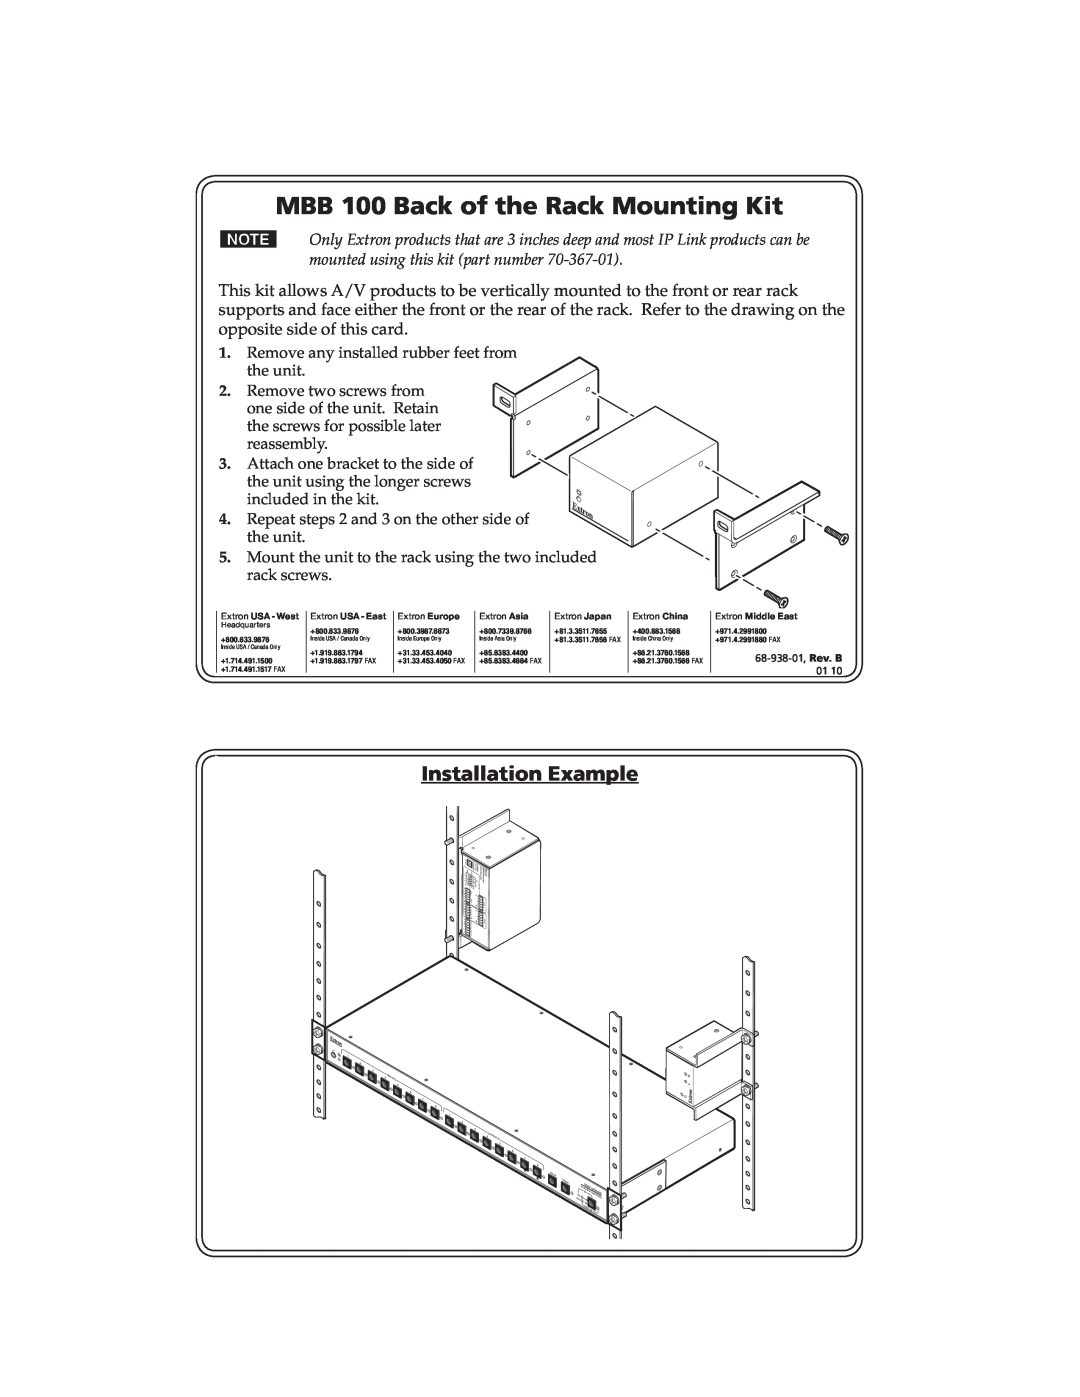 Extron electronic manual MBB 100 Back of the Rack Mounting Kit, Installation Example, 68-938-01, Rev. B, Extron Europe 